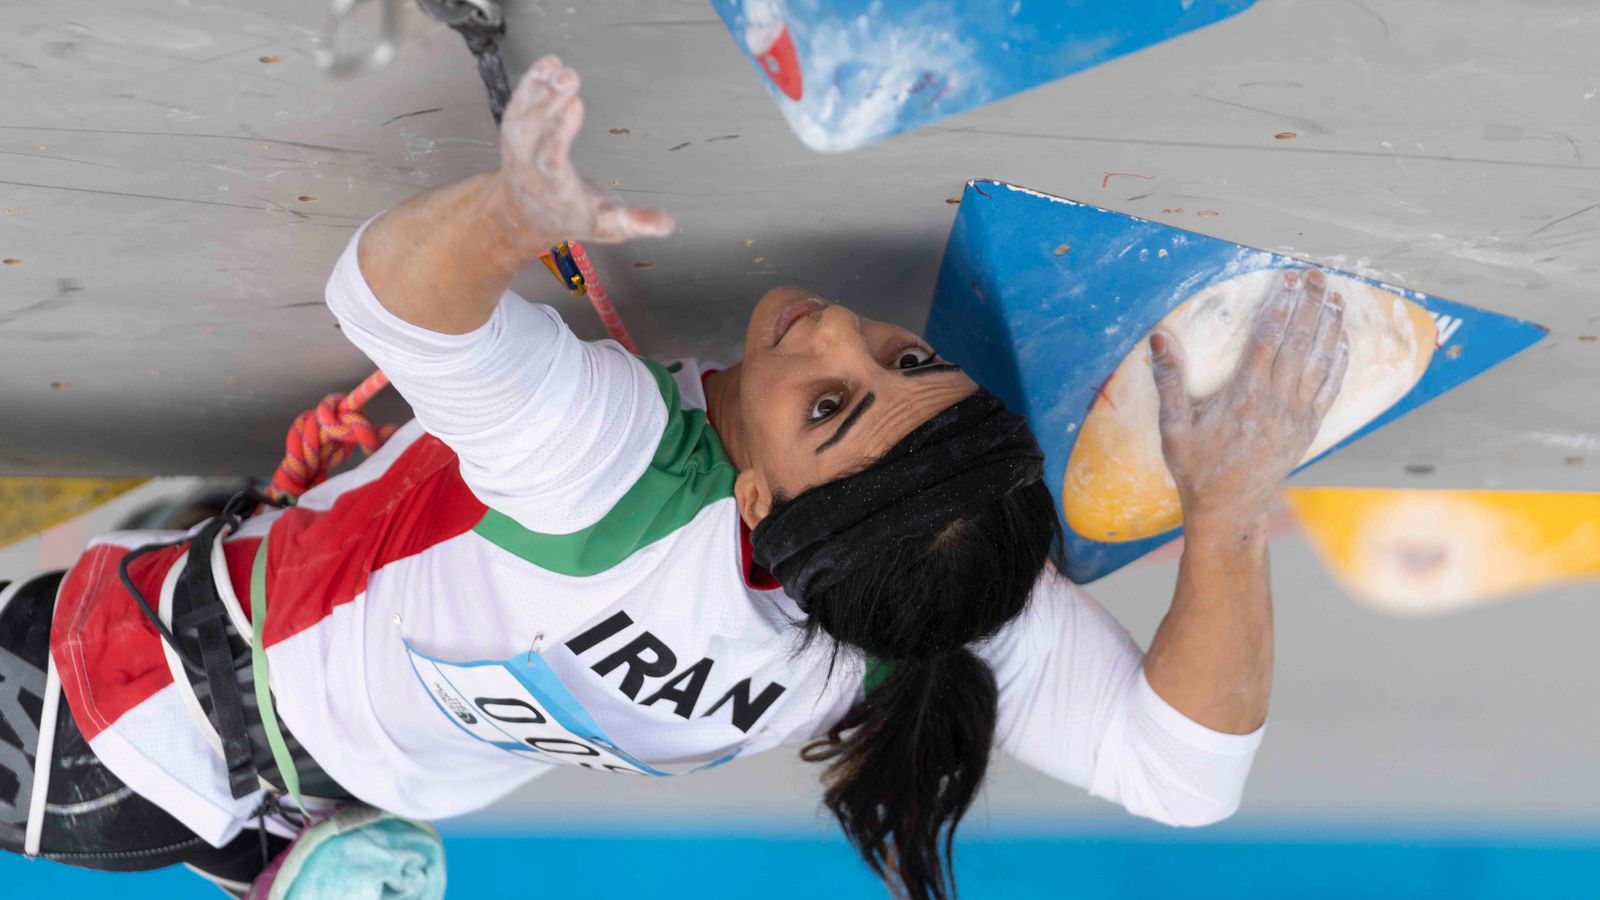 elnaz-rekabi-iranian-climber-who-competed-without-hijab-says-it-was-completely-unintentional